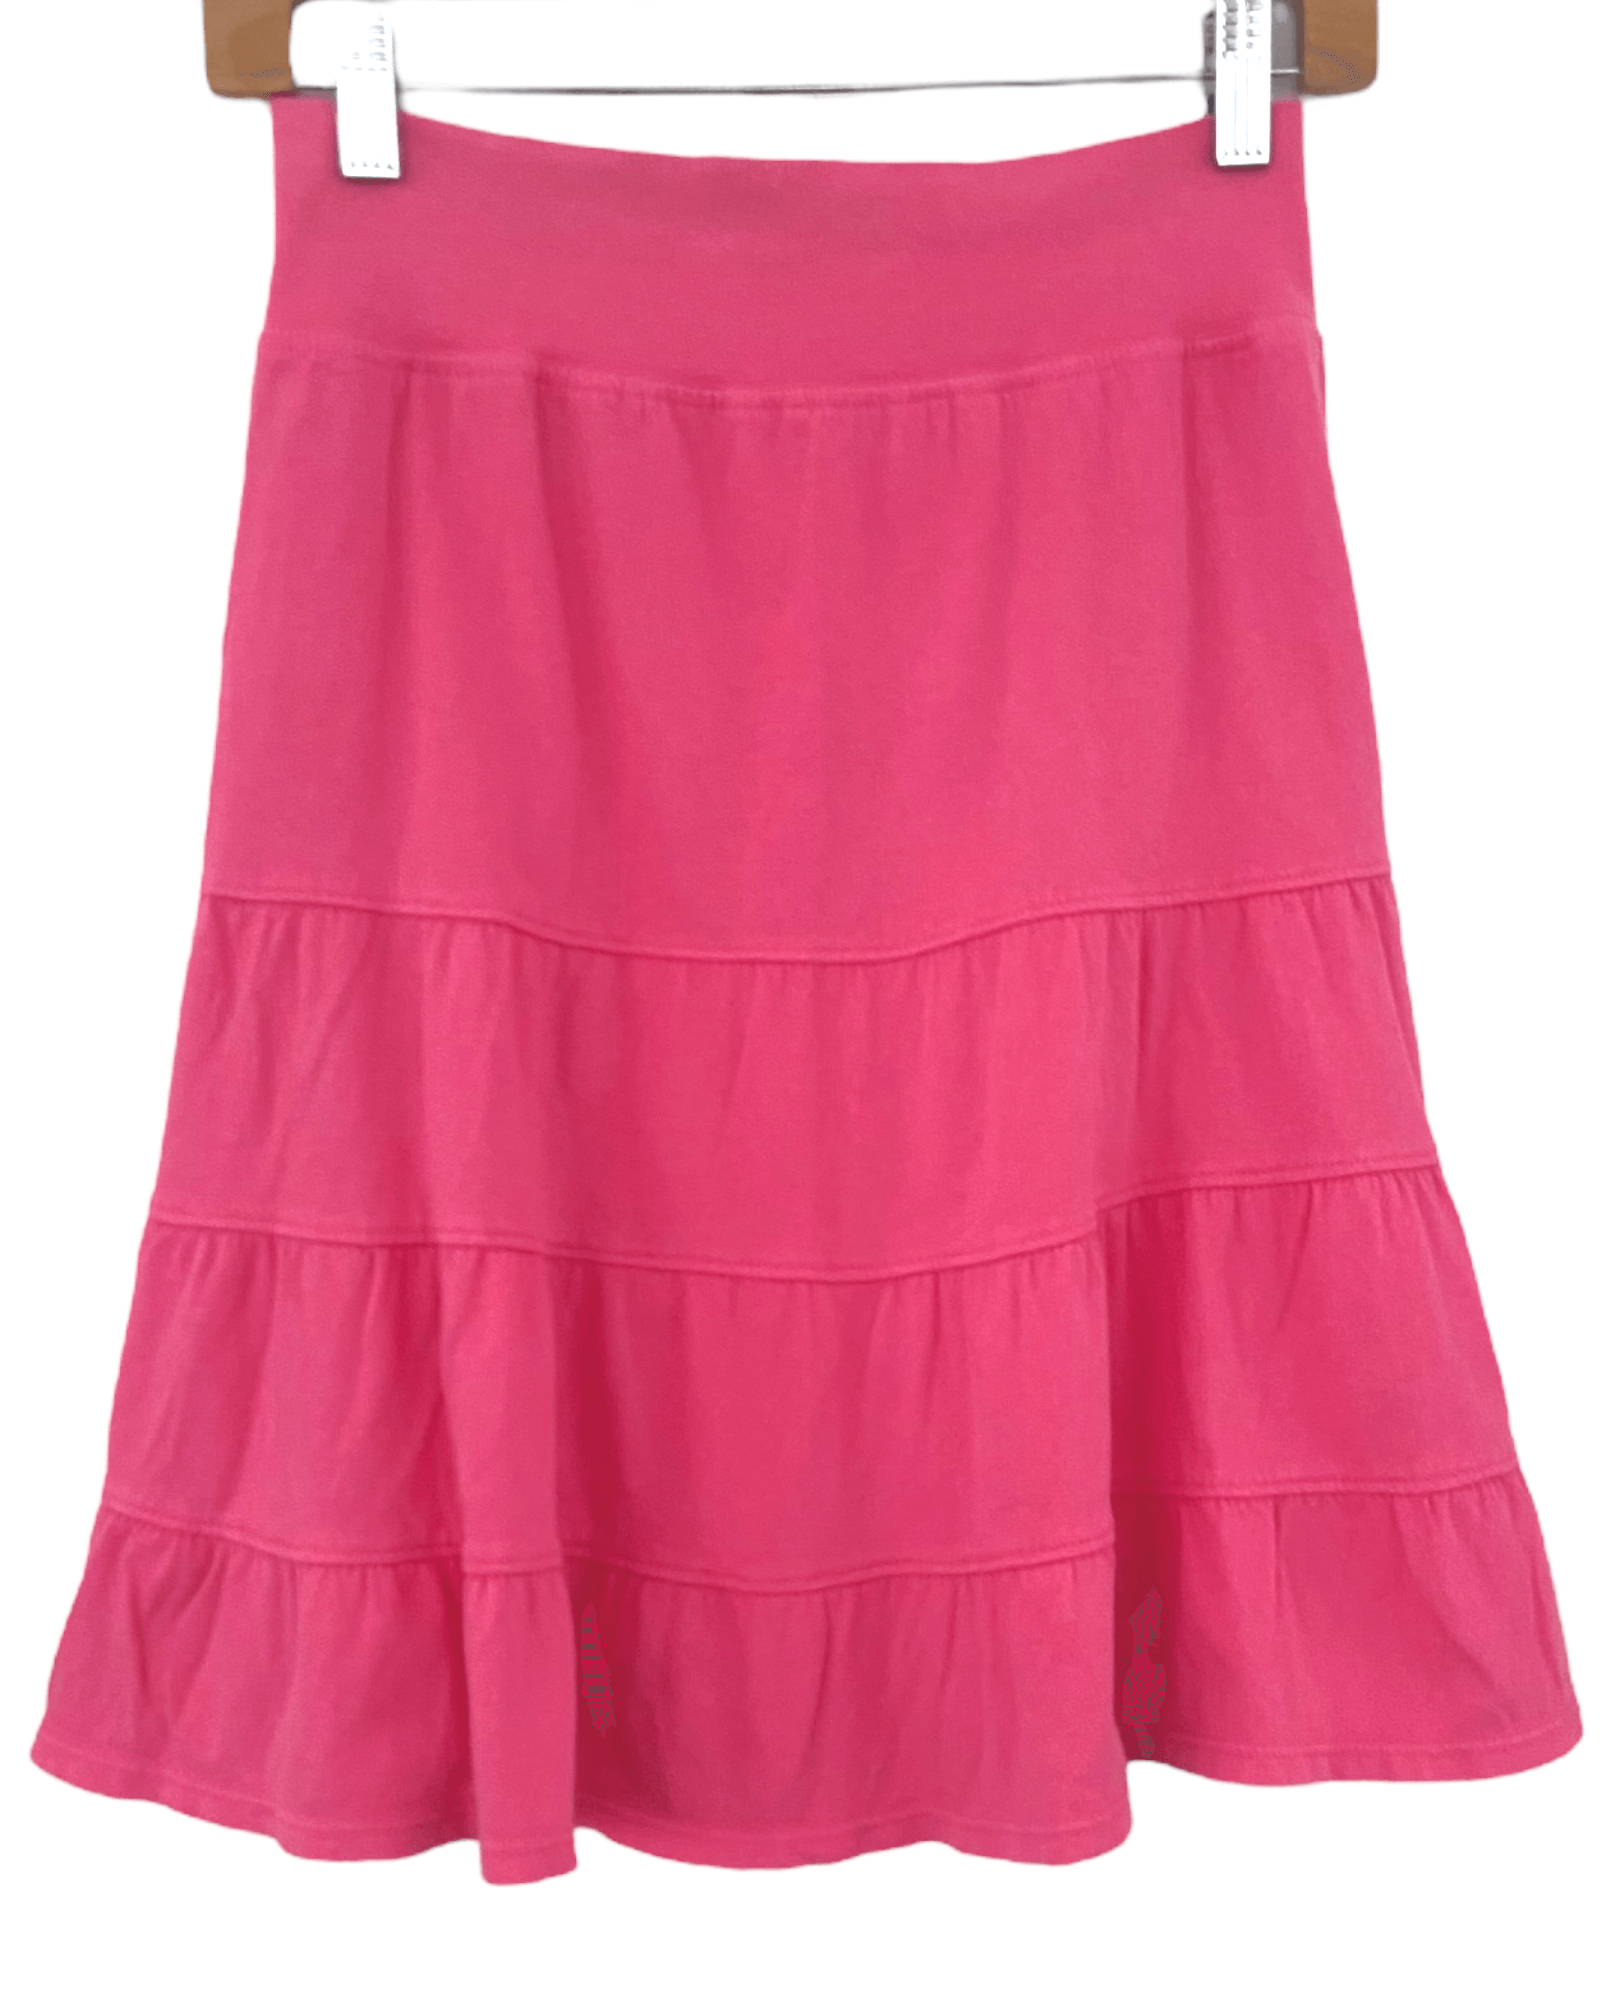 Light Spring FRESH PRODUCE pink tiered skirt